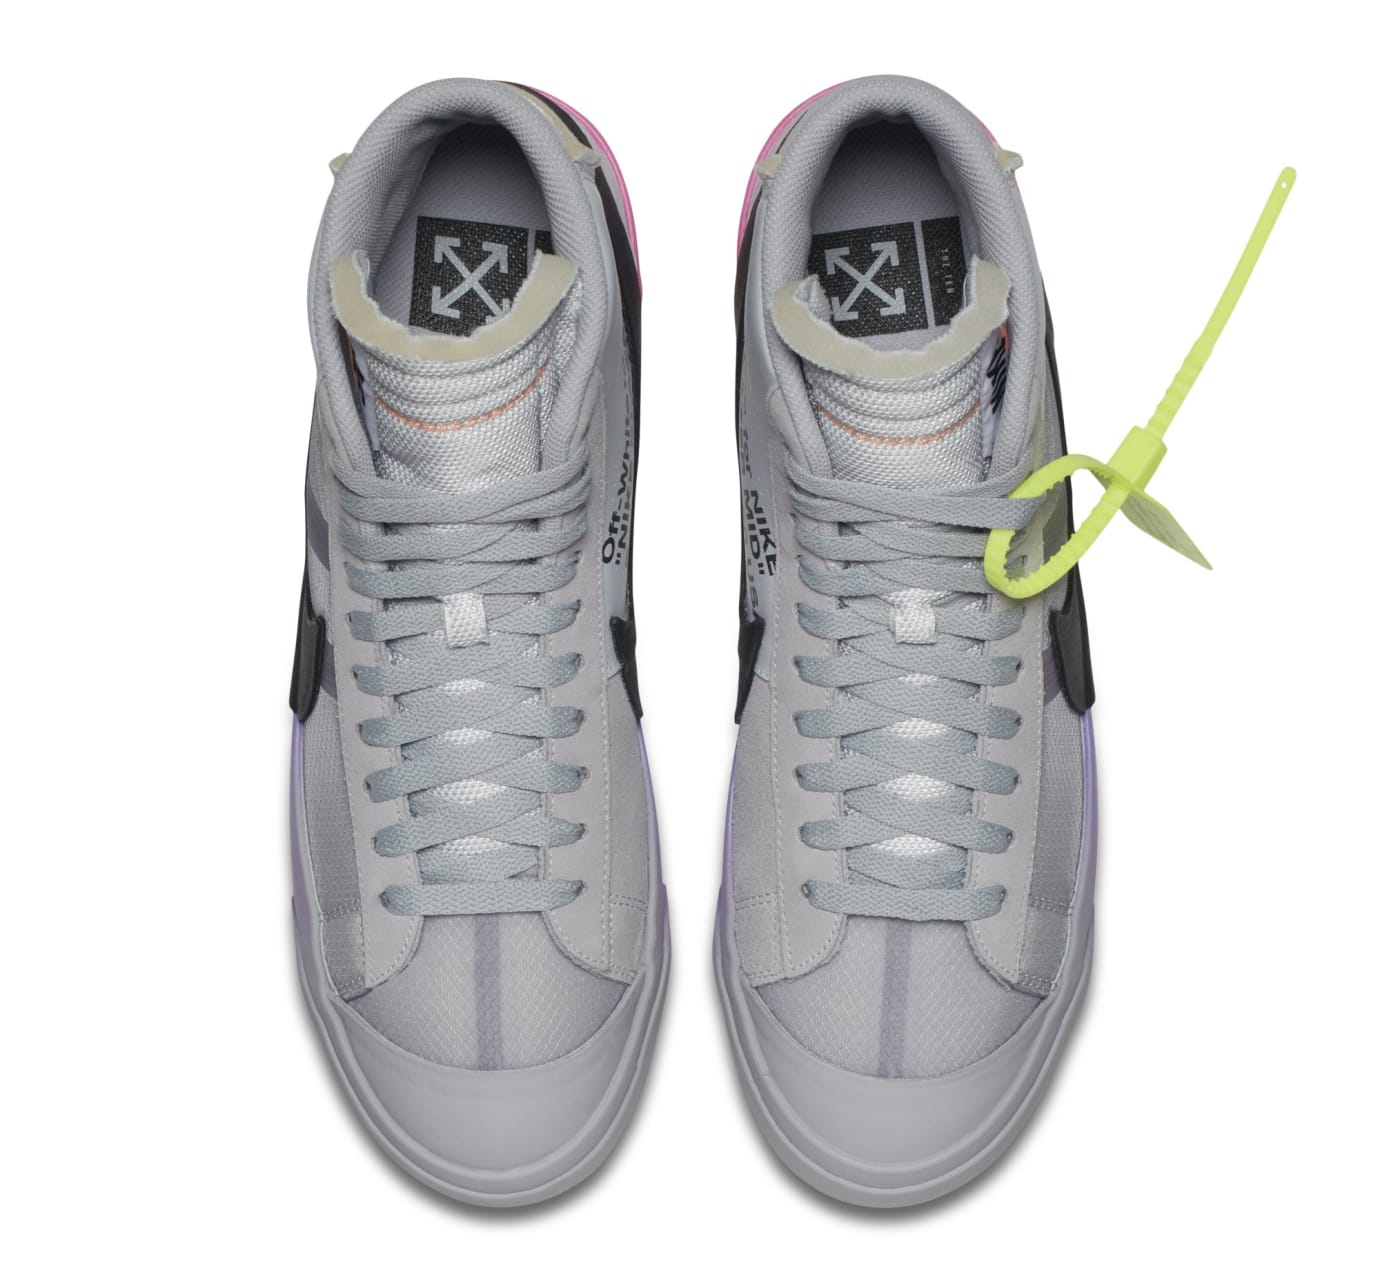 astronaut Playwright signature Serena Williams x Off-White x Nike Blazer 'Queen' AA3832-002 Release Date |  Sole Collector